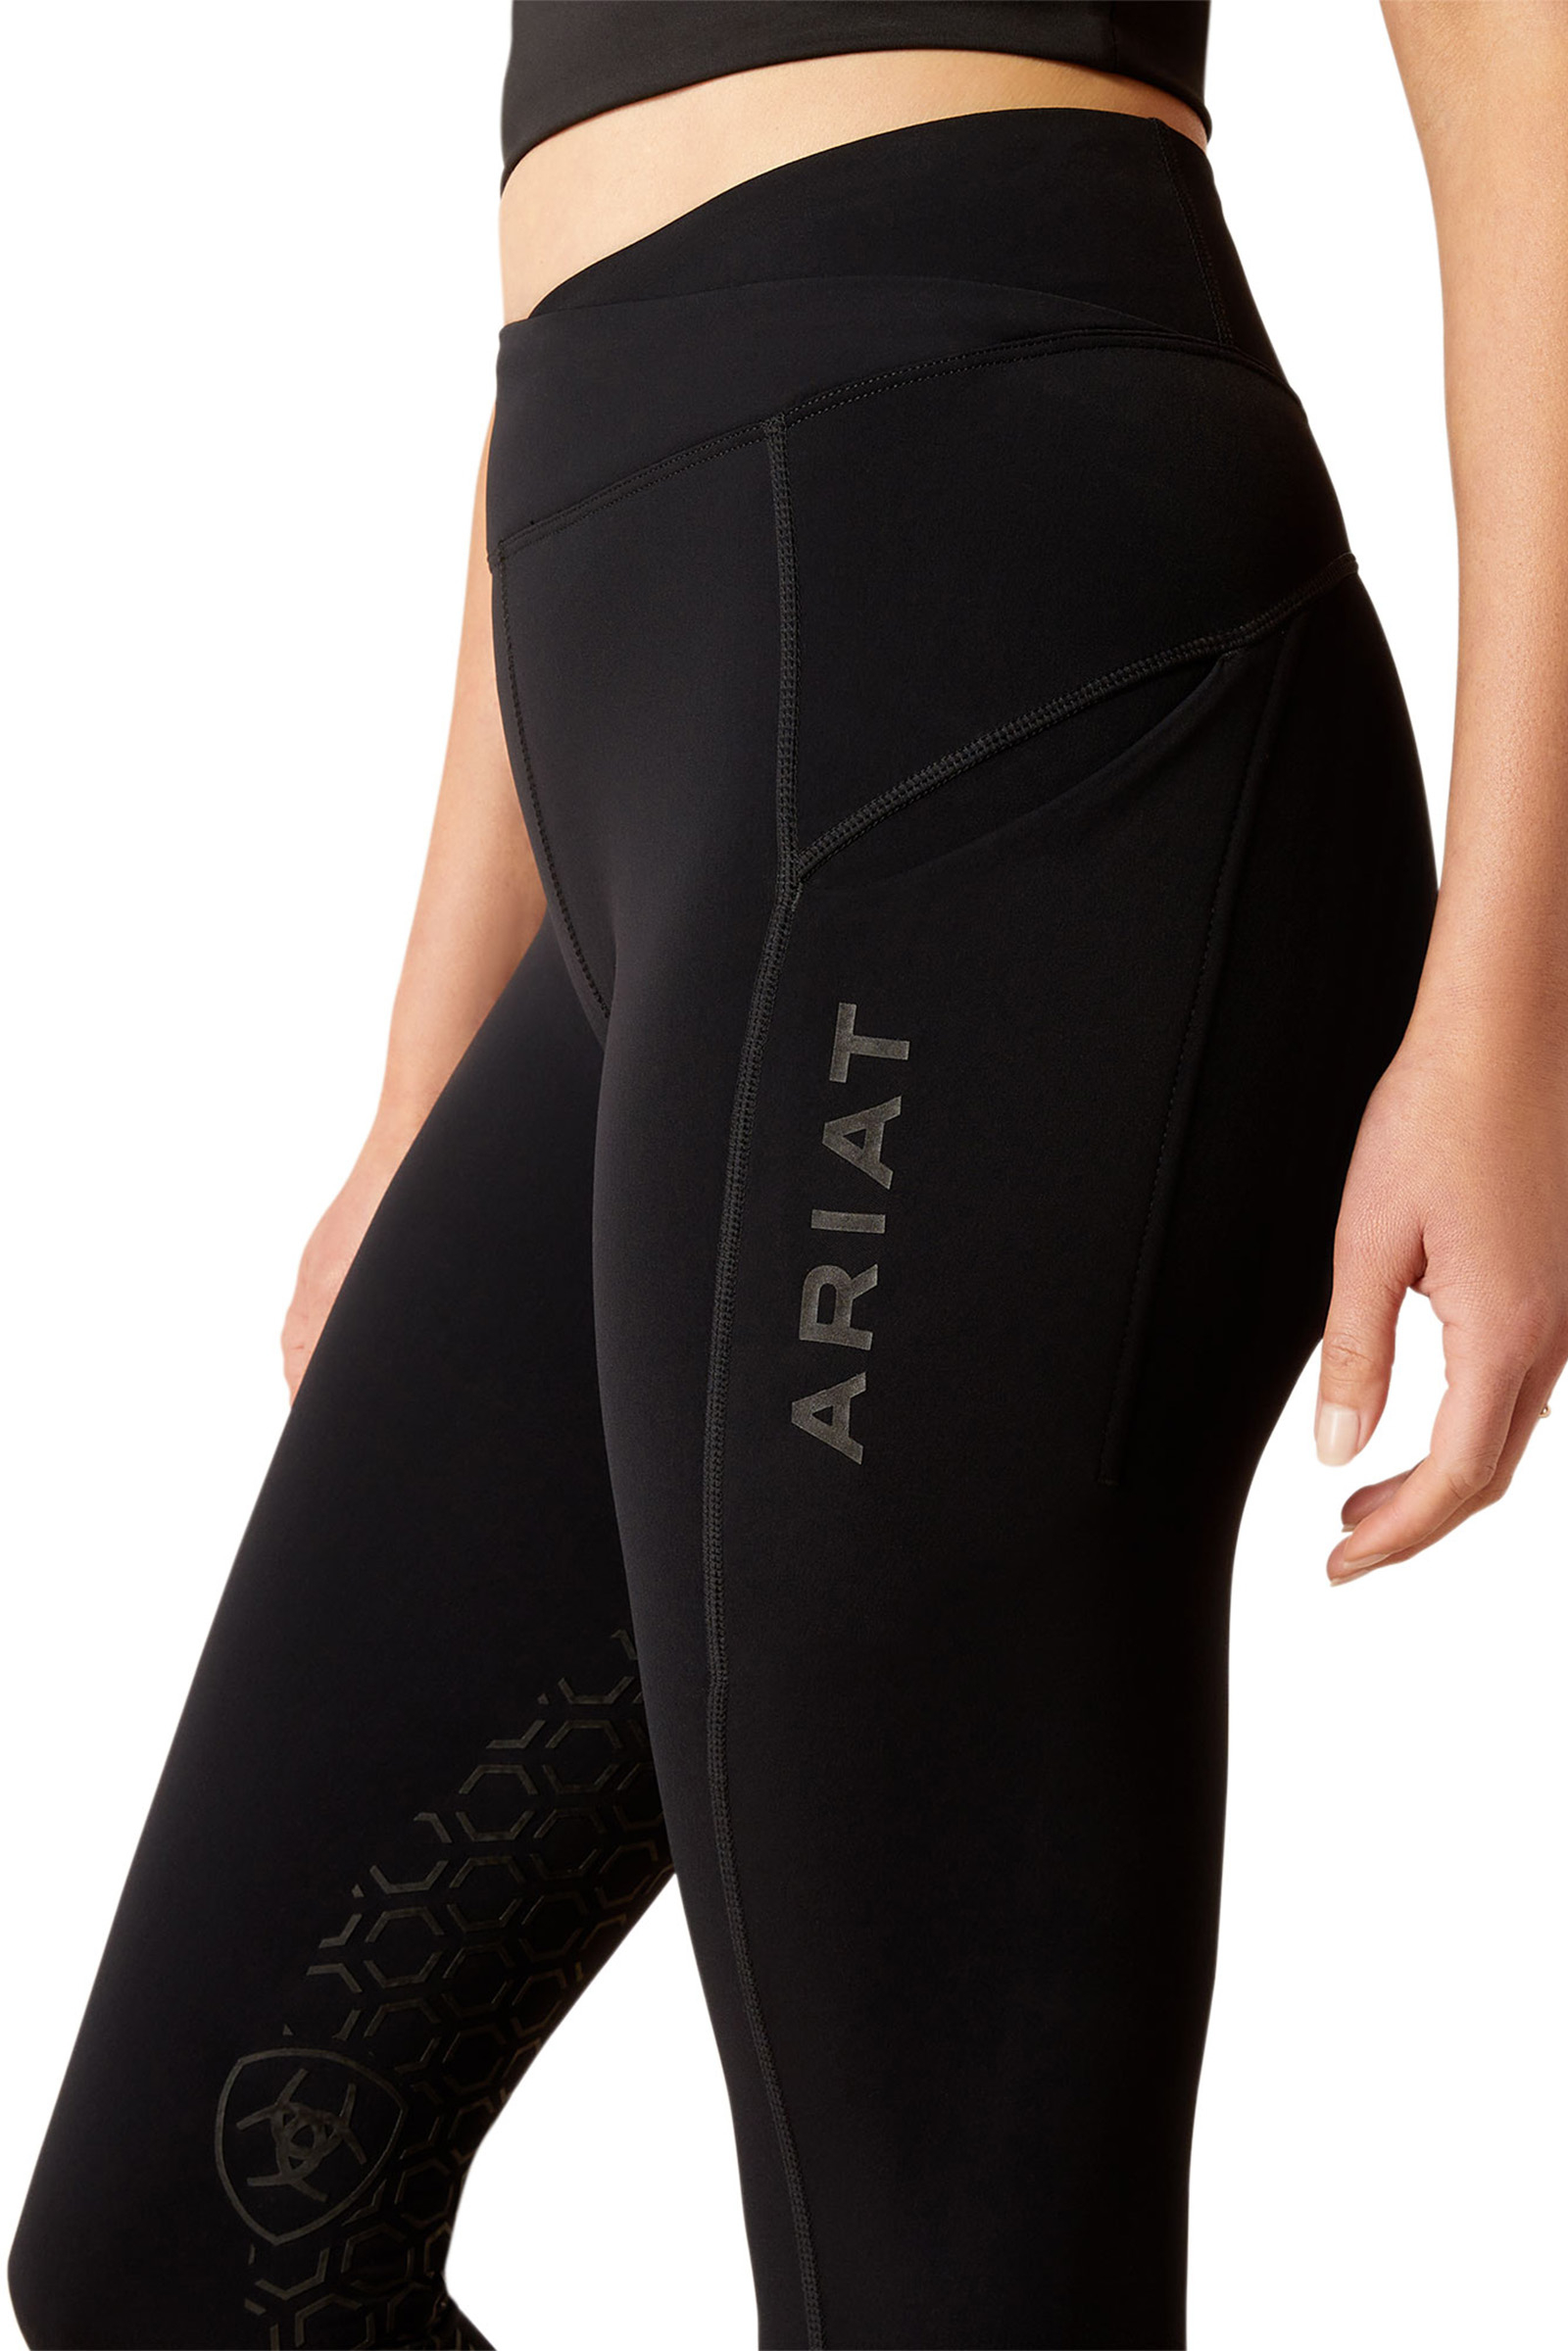  ARIAT Women's Attain Thermal Knee Patch Insulated Grip Tight  Black Size X-Small : Clothing, Shoes & Jewelry